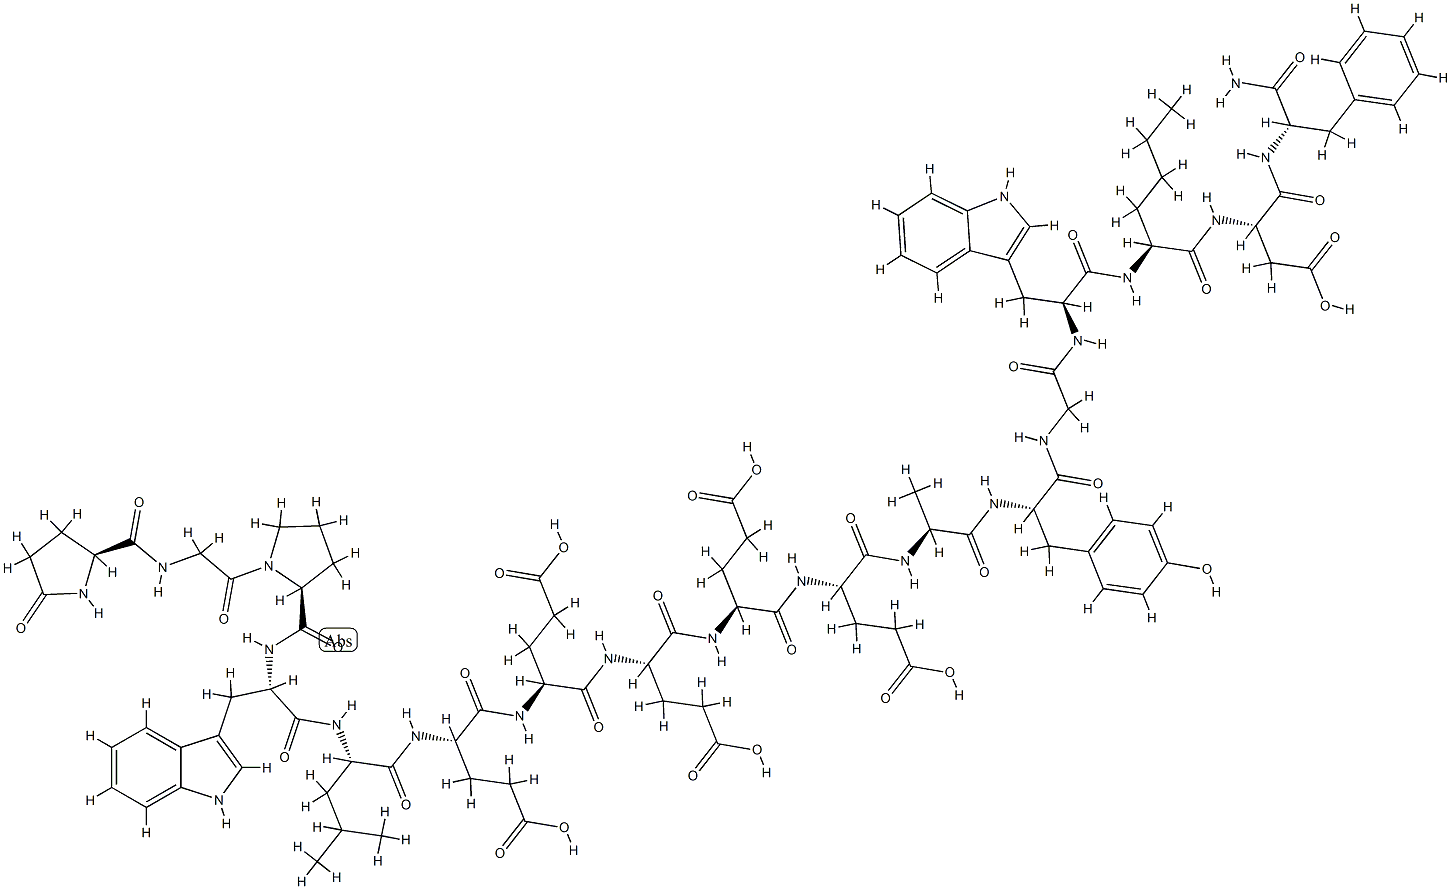 gastrin heptadecapeptide, Nle(15)- 结构式